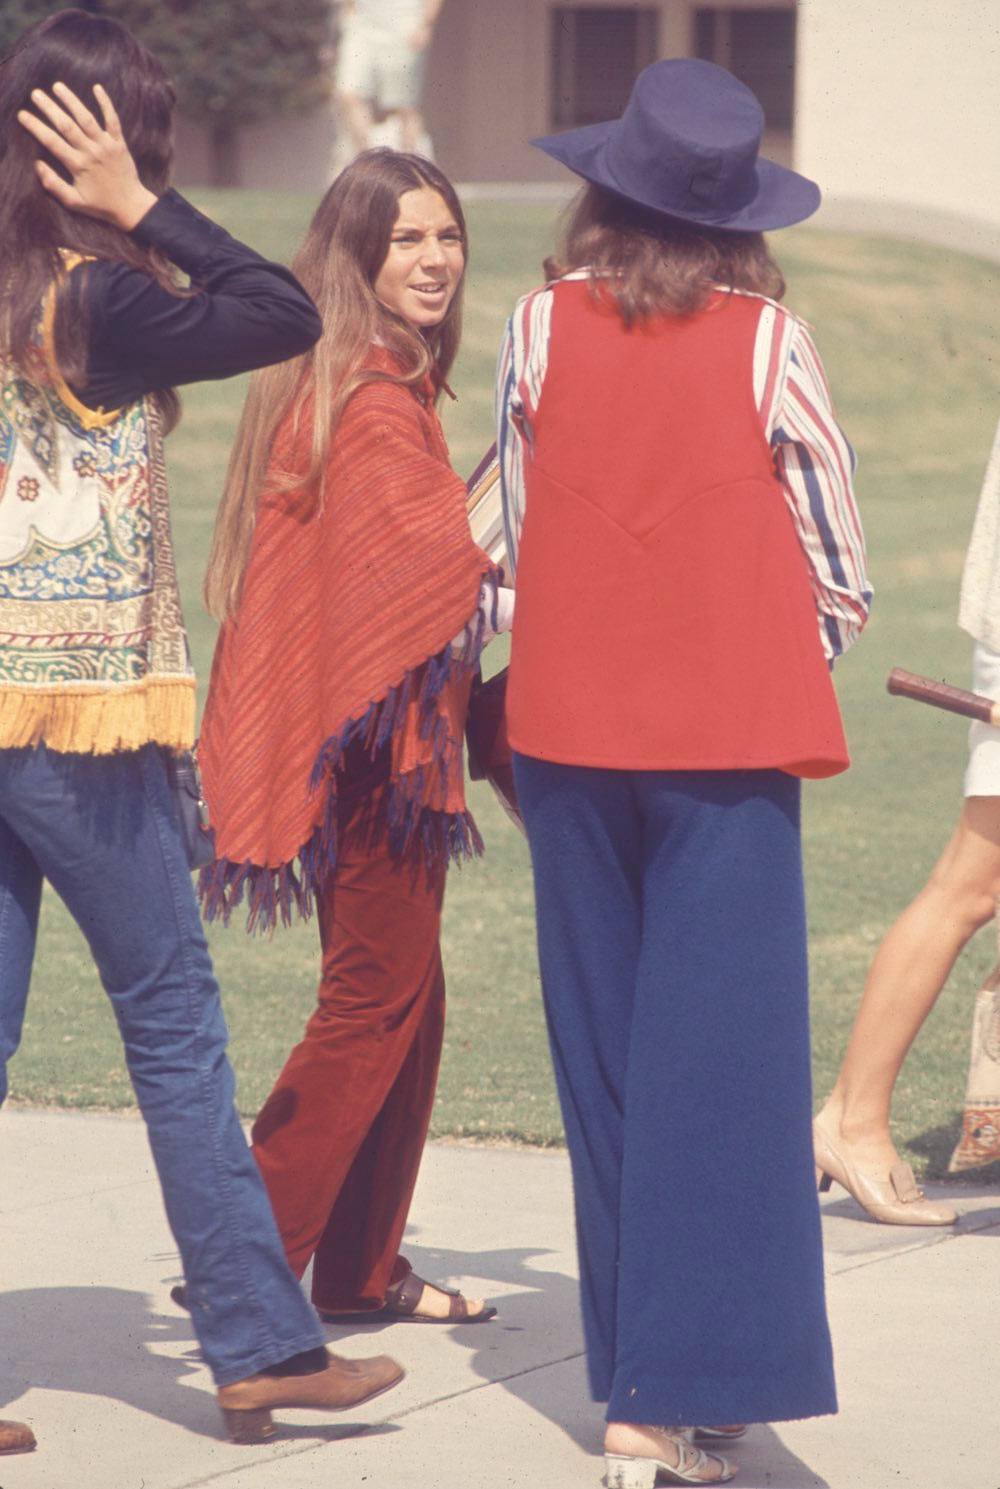 This is What American High School Students Dressed Like in 1969